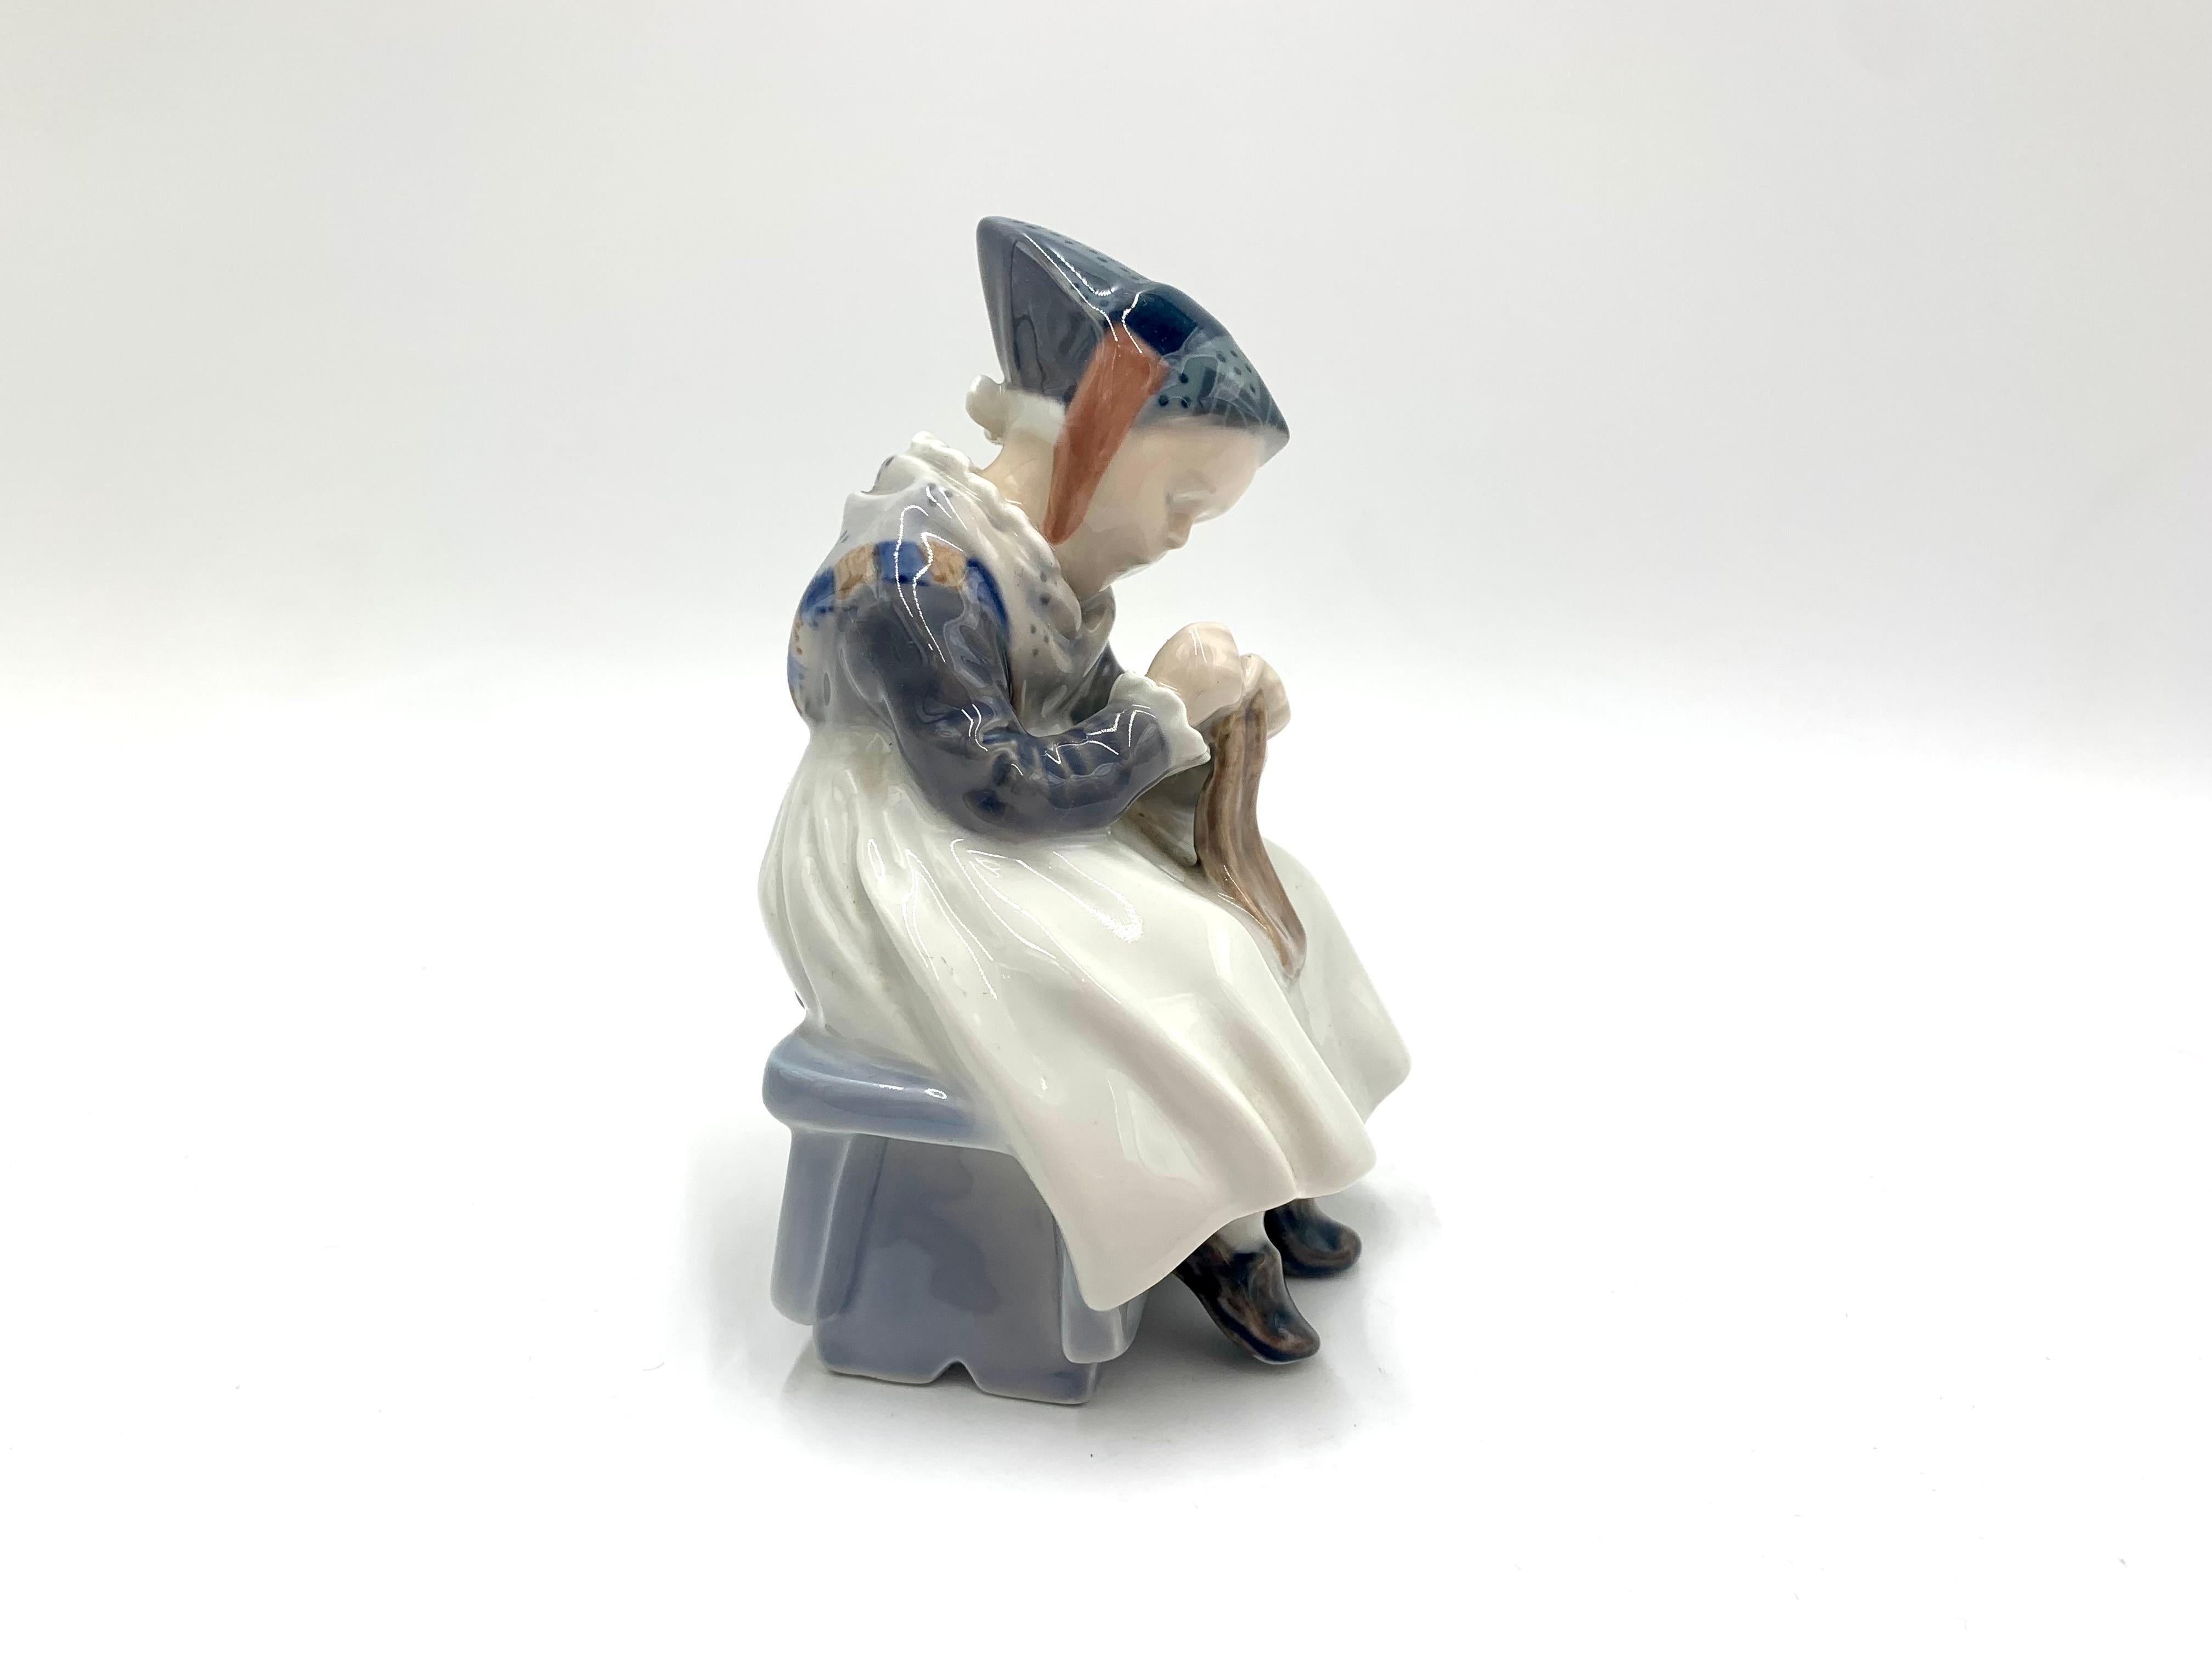 Porcelain figurine of a sewing woman in regional costume.

Made in Denmark by the Royal Copenhagen manufactory

Produced in 1974-1978.

Model number # 1314

Very good condition, no damage.

Measures: height 15 cm, width 10 cm, depth 9 cm.